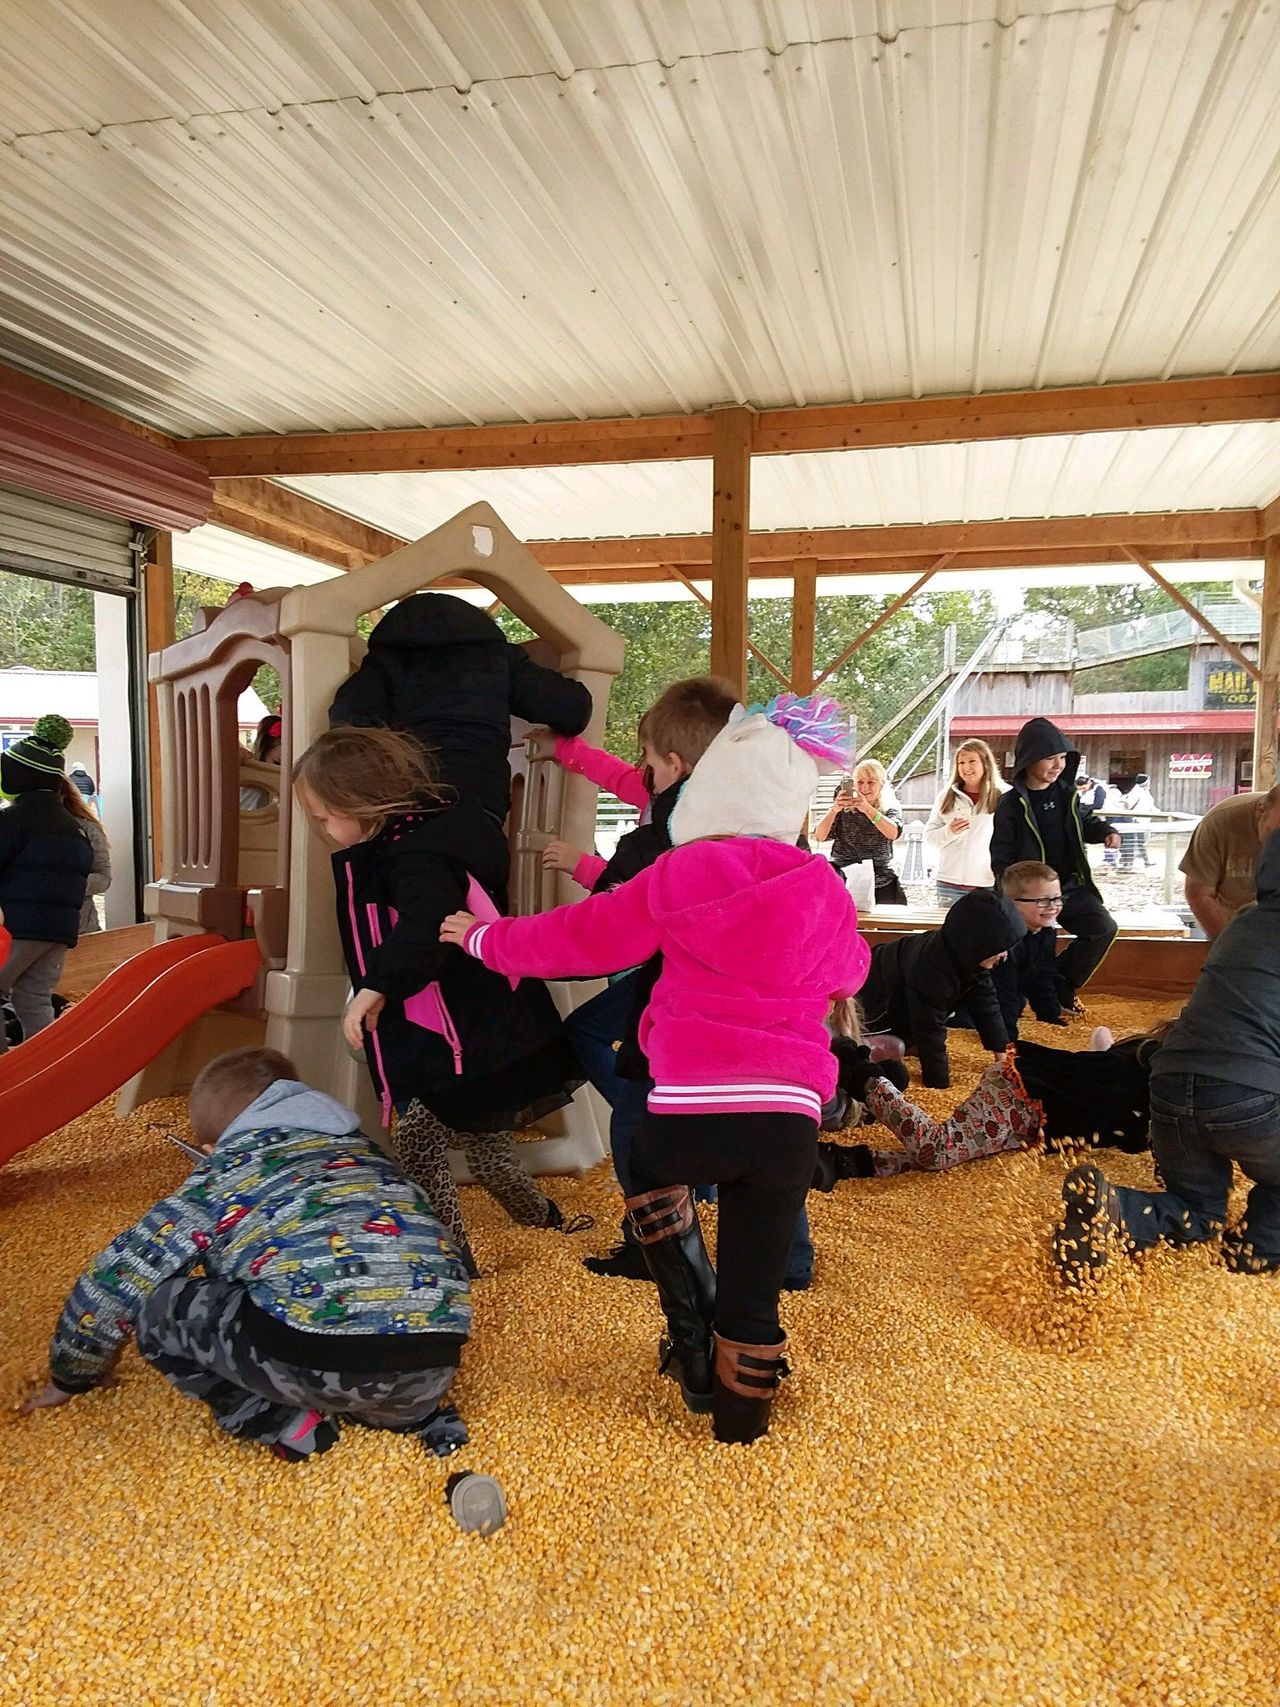 Students playing in corn